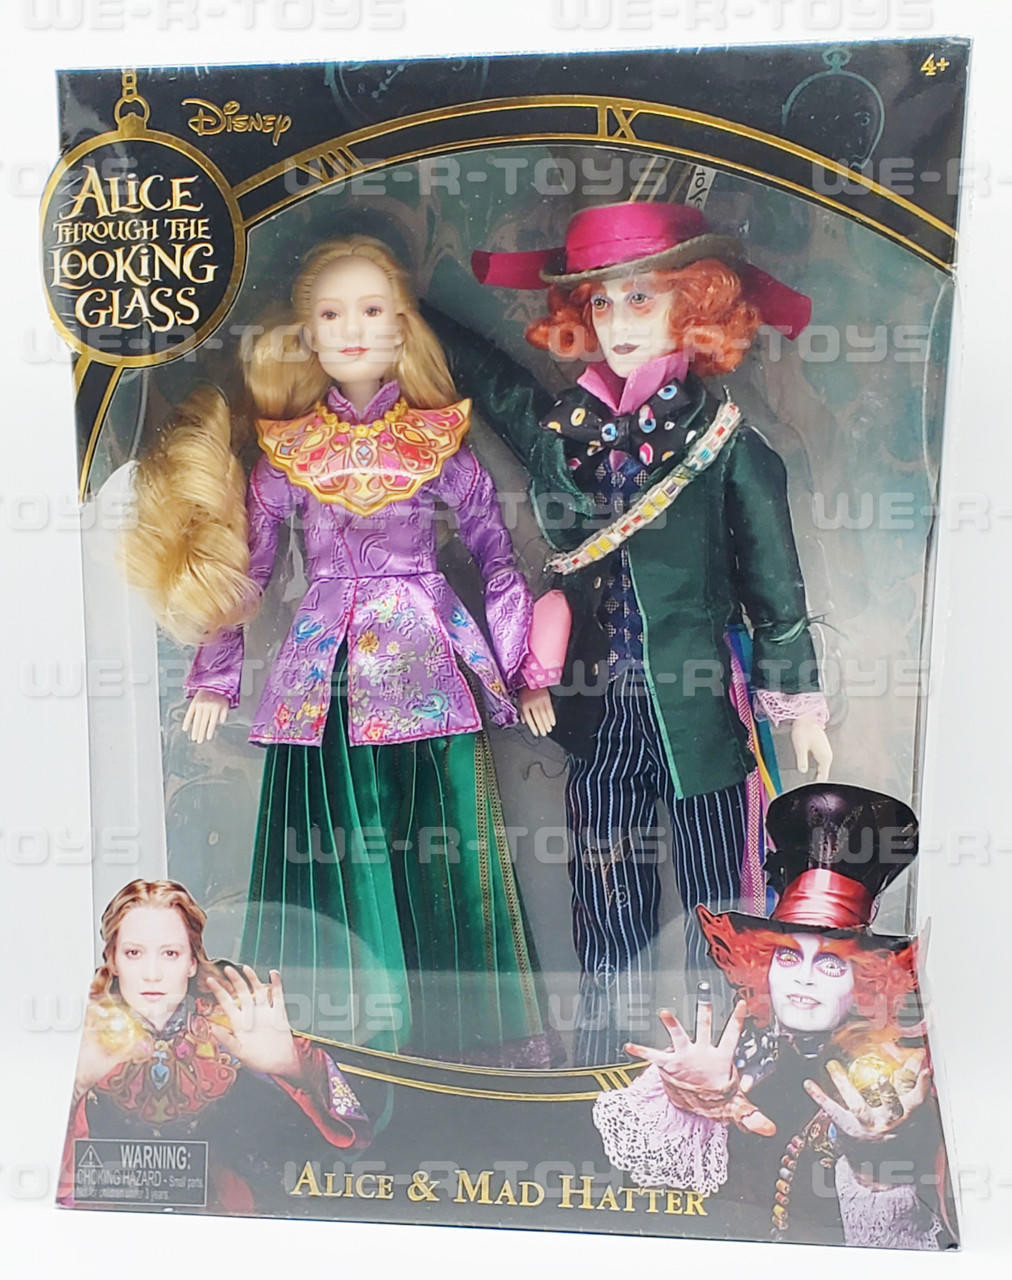 https://cdn11.bigcommerce.com/s-cy4lua1xoh/images/stencil/1280x1280/products/15809/113909/disney-alice-through-the-looking-glass-dolls-alice-and-mad-hatter-no-98774-nrfb__21333.1662534561.jpg?c=1